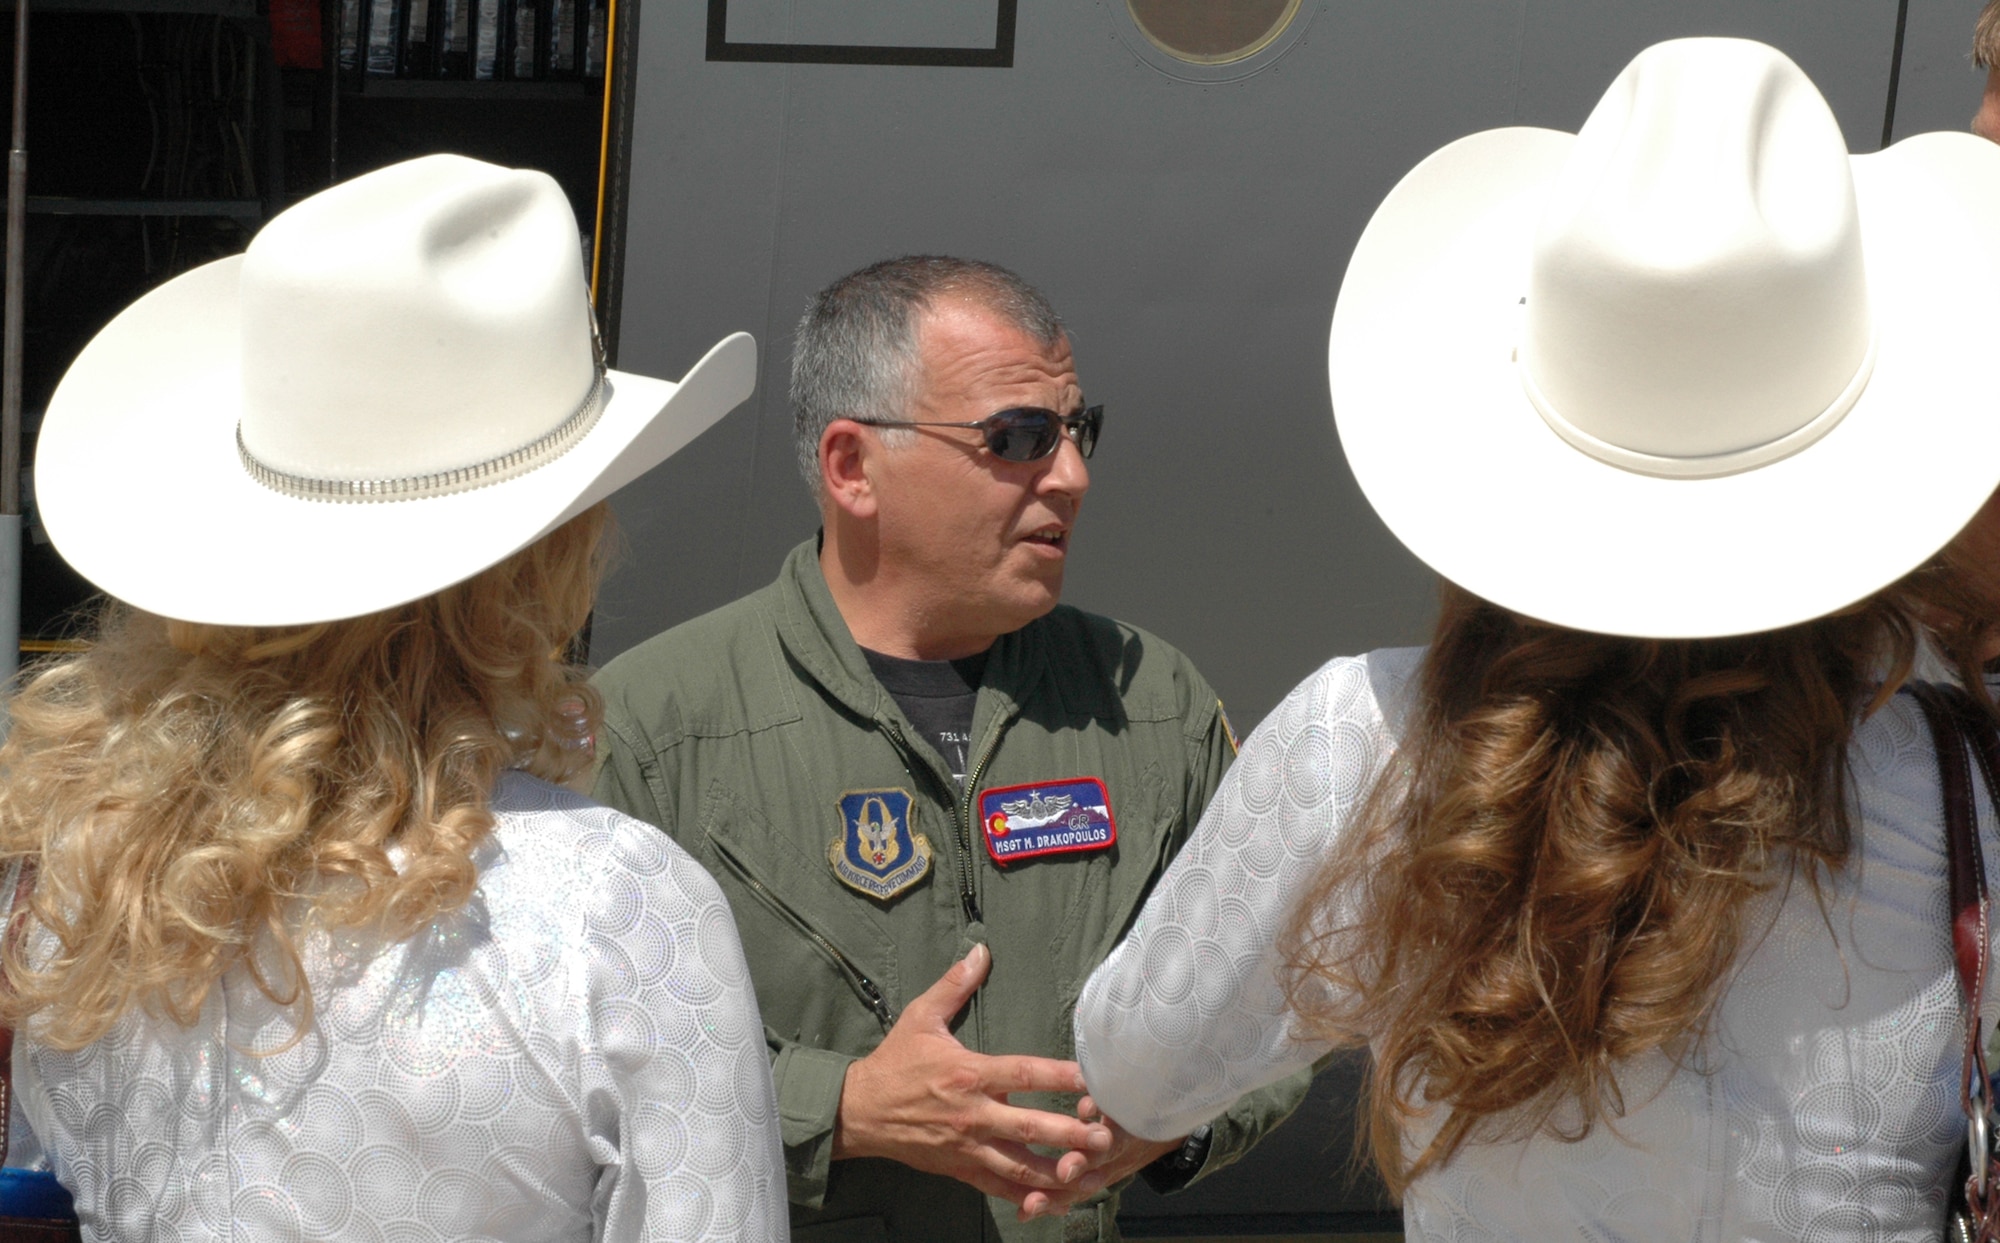 Master Sgt. Miltiadis "Drak" Drakopoulos explains to Girls of the West ladies Jessica Greene (left) and Dayna Jenkins the capabilities of the 302nd Airlift Wing's C-130 Hercules aircraft July 1 at Peterson Air Force Base, Colo. Both Miss Greene, the Girl of the West, and her aide, Miss Jenkins, received an up-close look at the 302nd Airlift Wing's primary mission of tactical airlift and airdrop and experienced a re-enlistment ceremony for an enlisted member. Sergeant Drakopoulos is a C-130 loadmaster assigned to the 731st Airlift Squadron. The 302nd AW is an AF Reserve-assigned unit also charged with mission of aerial firefighting using the Modular Airborne Firefighting System. For more information on the Girls of the West, visit www.coloradospringsrodeo.com. (U.S. Air Force photo/Staff Sgt. Stephen J. Collier)